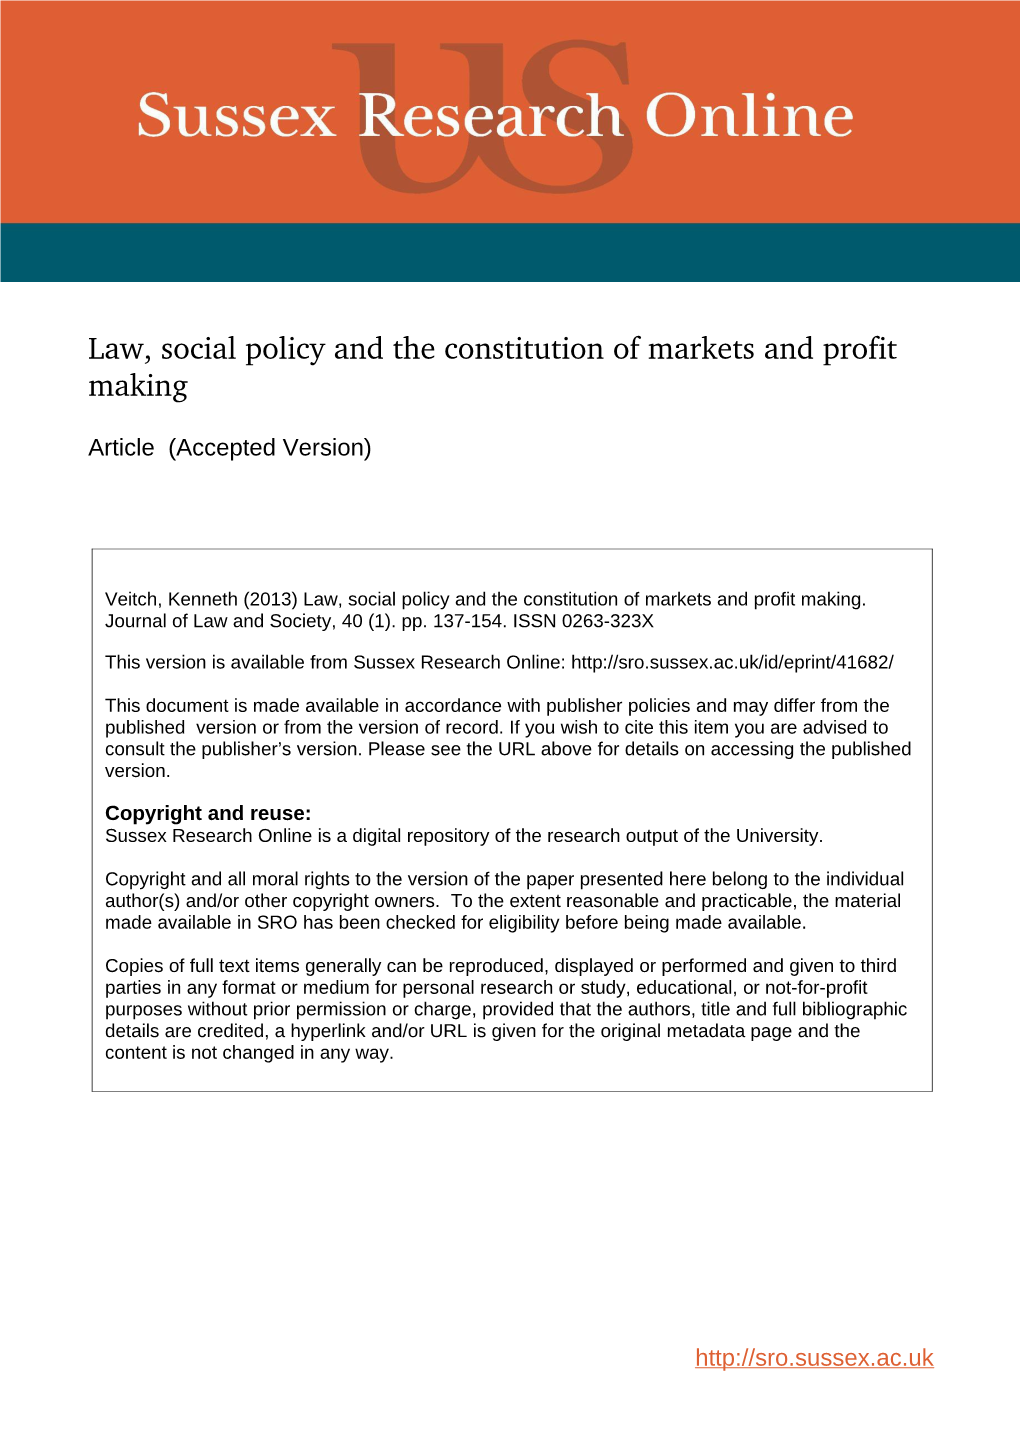 Law, Social Policy and the Constitution of Markets and Profit Making